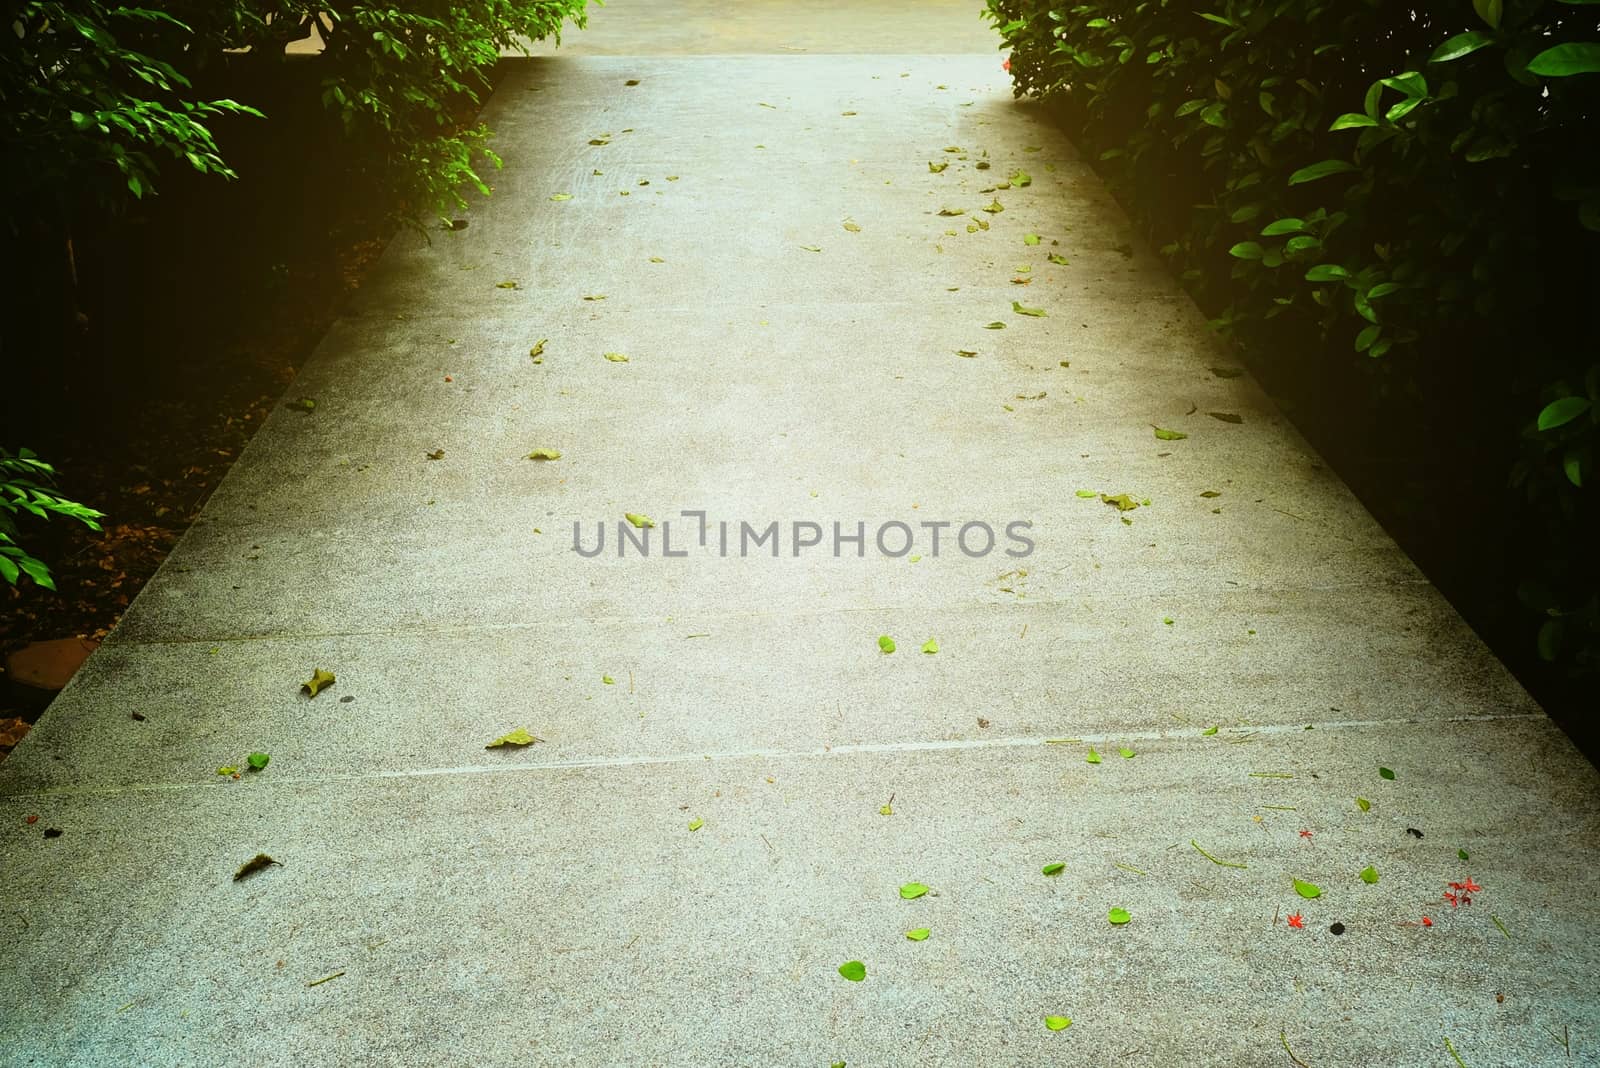 Concrete Pathway in The Park. by mesamong